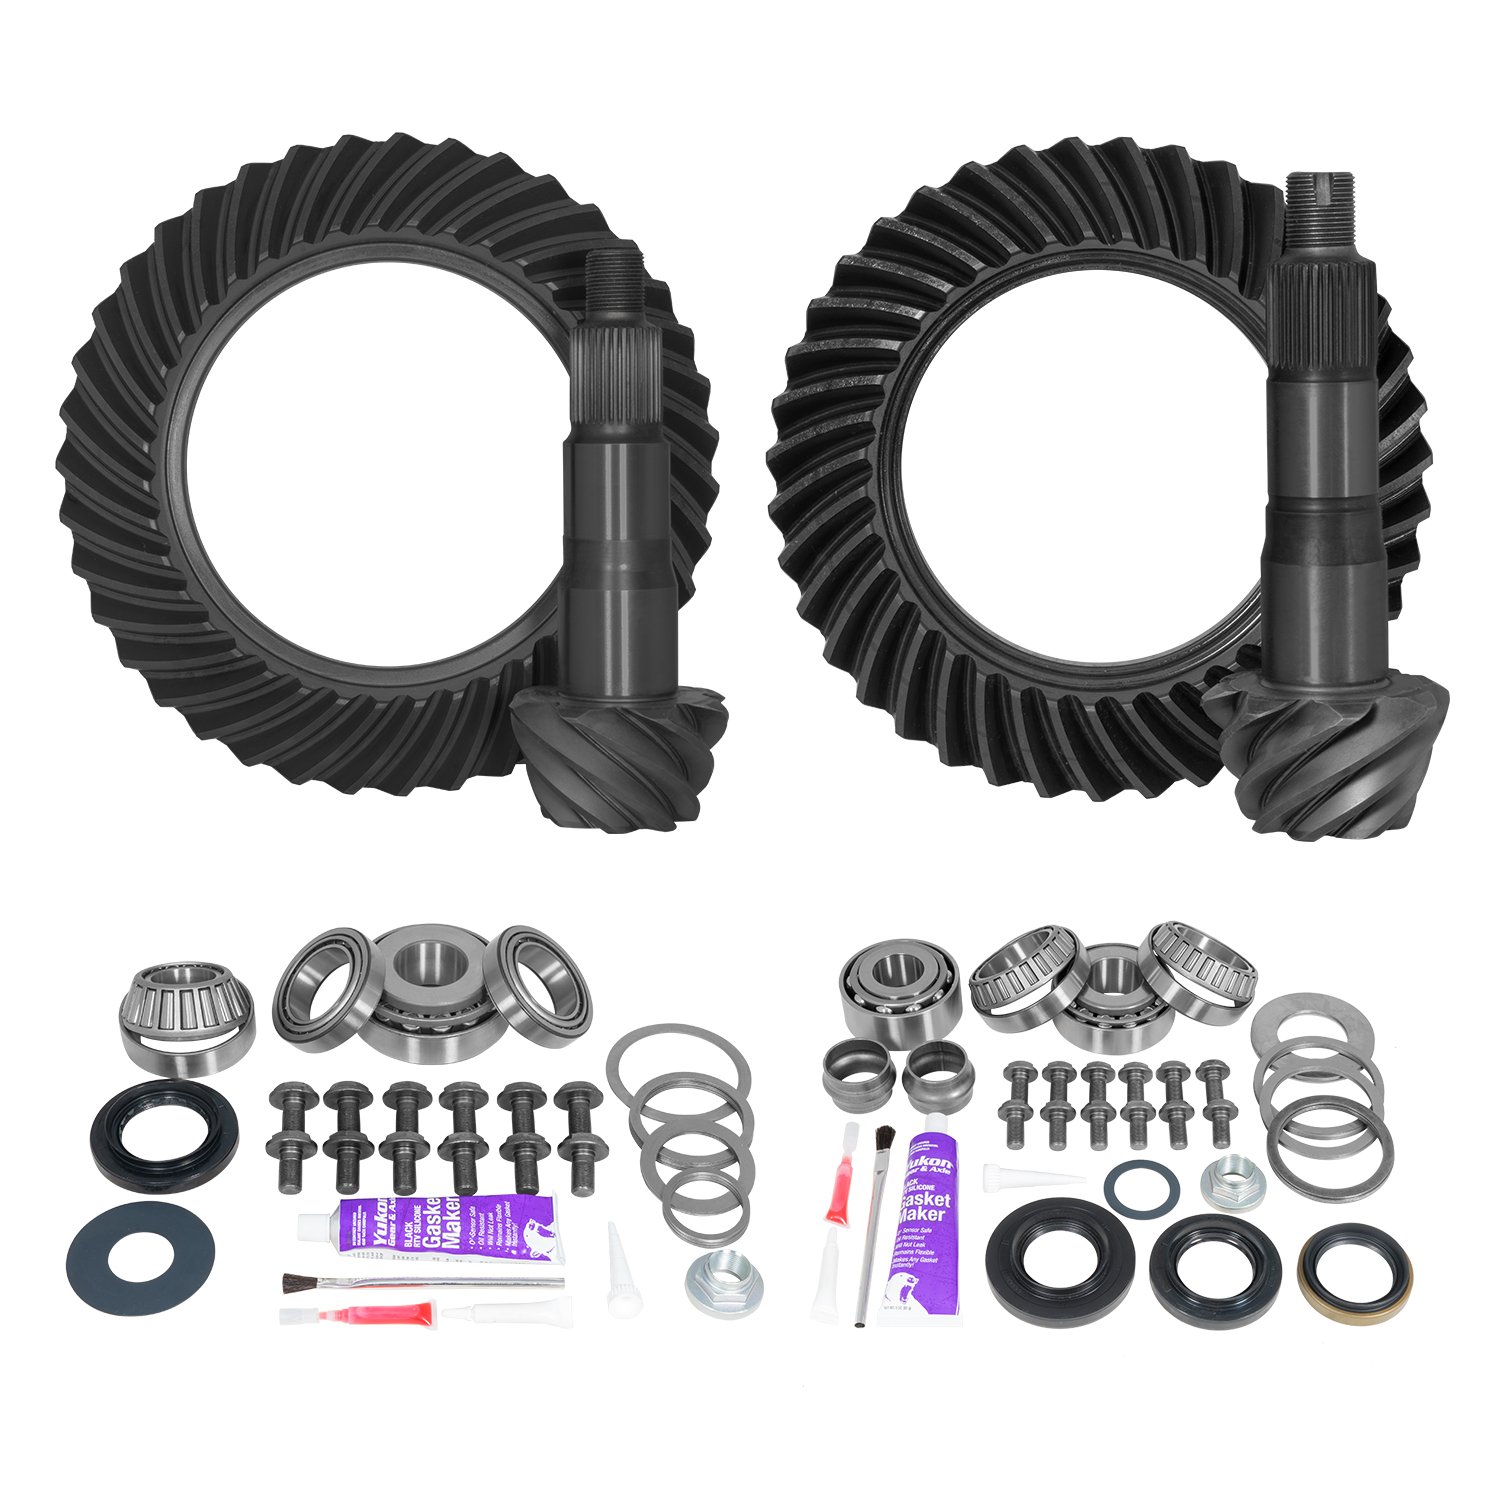 Ring & Pinion Gear Kit Package Front & Rear With Install Kits - Toyota 10.5/9R